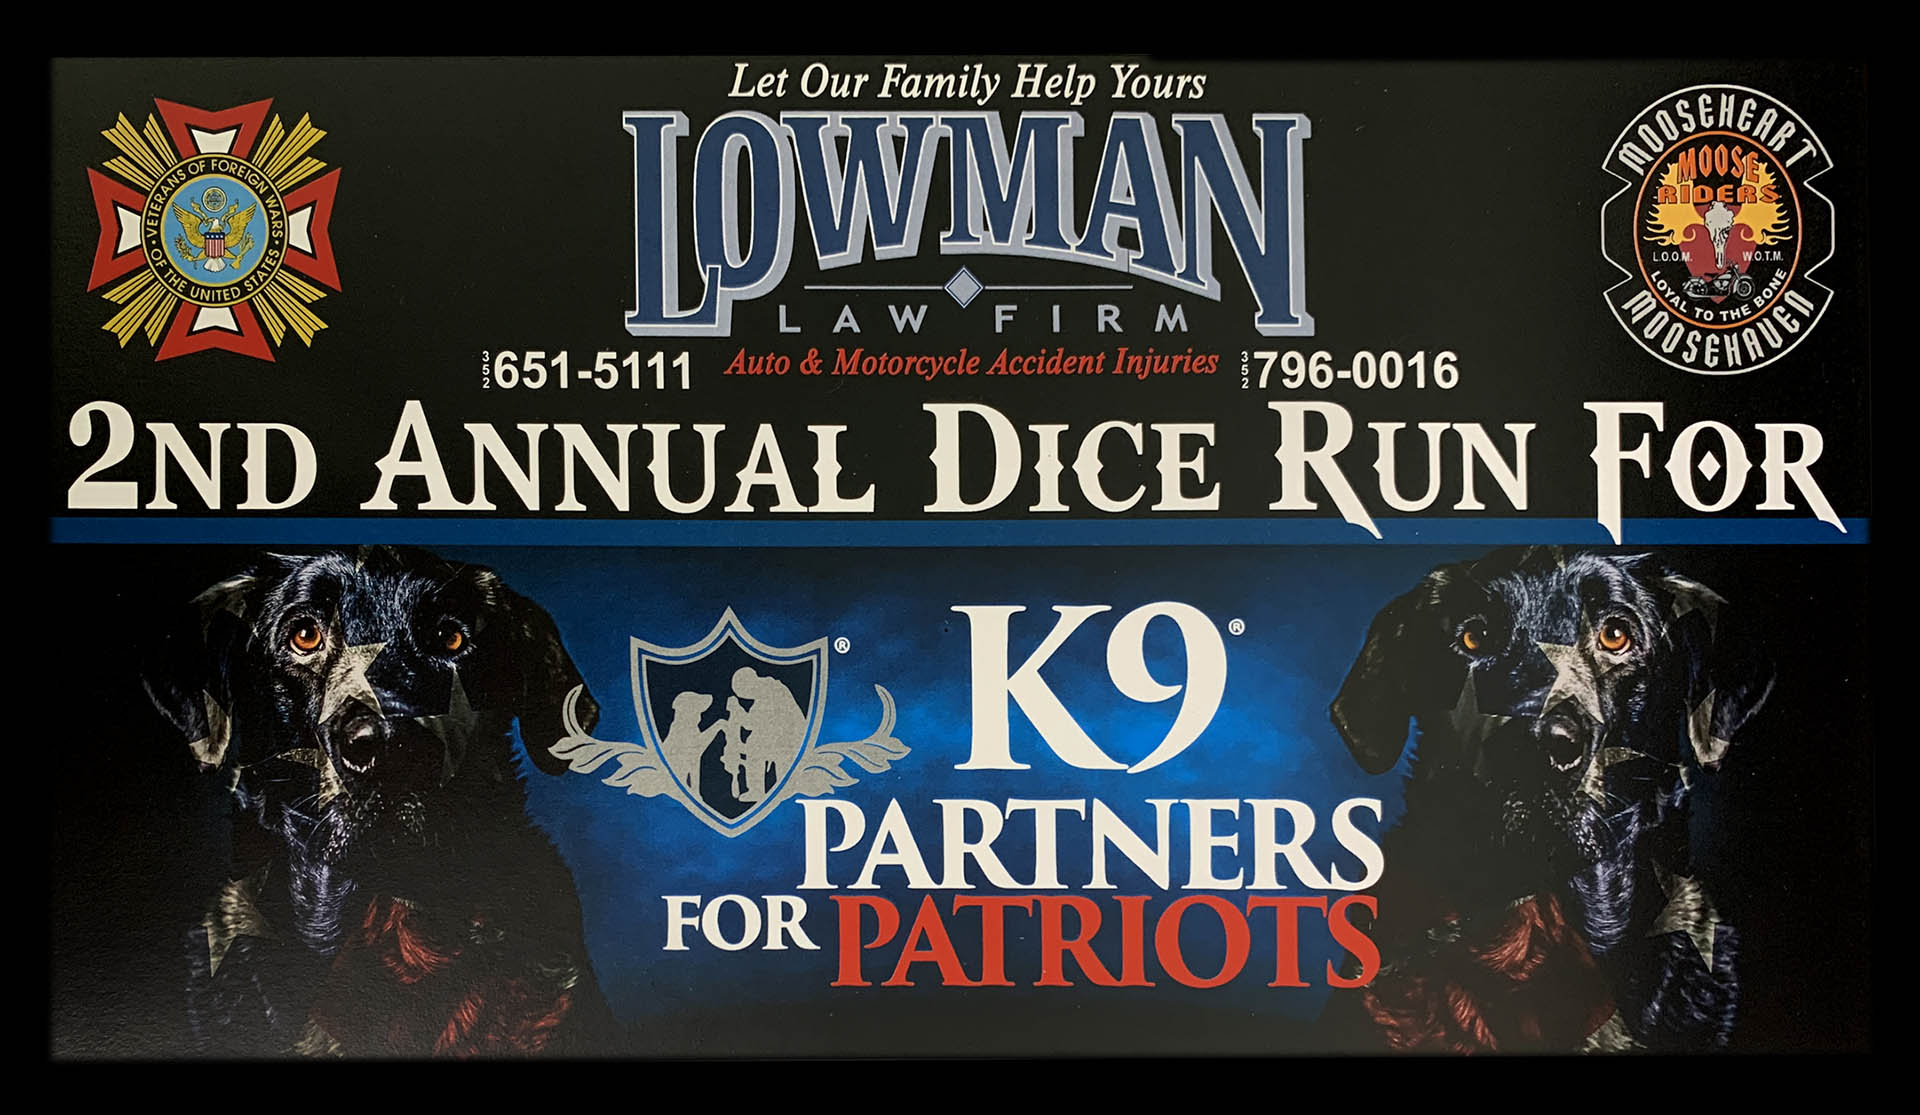 Lowman Law Firm 2nd Annual Dice Run for K9 Partners for Patriots